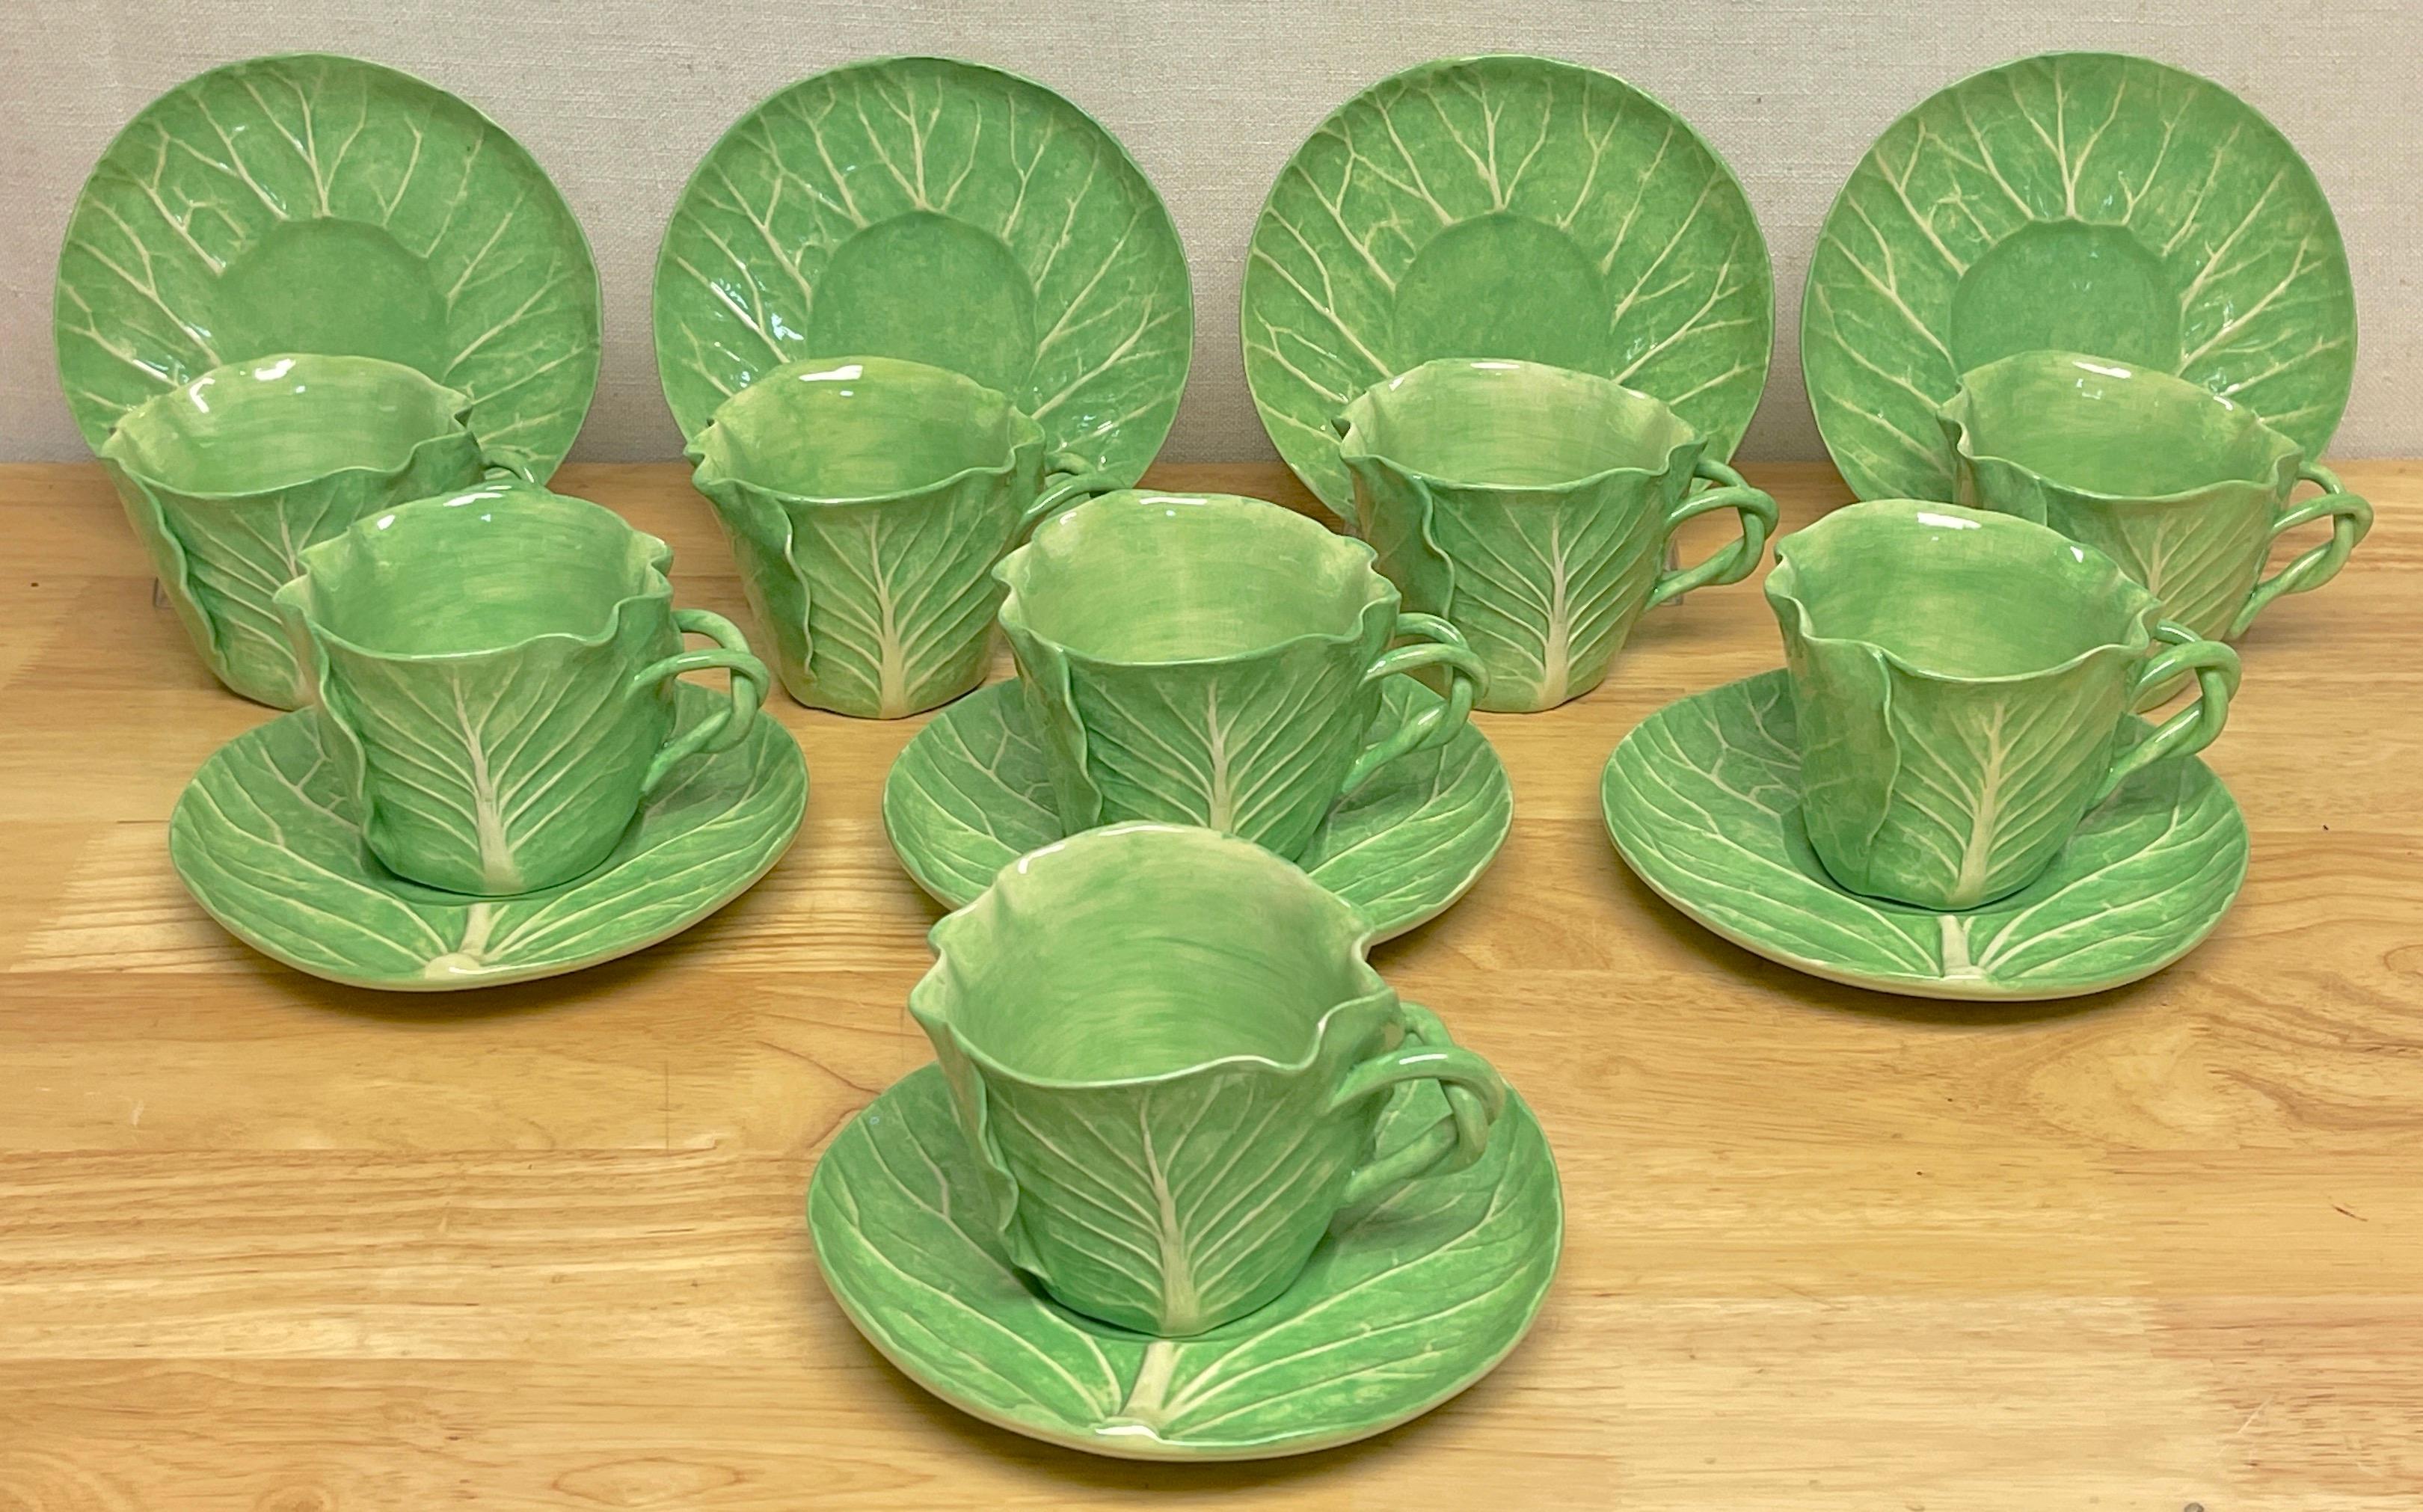 Dodie Thayer Jupiter 'Jumbo' lettuce leaf cup & saucer, 5 available, sold individually.
A rare opportunity to acquire the largest model of the hand-made Dodie Thayer lettuce-ware cups and saucers. Examples like these from the 1970s are especially